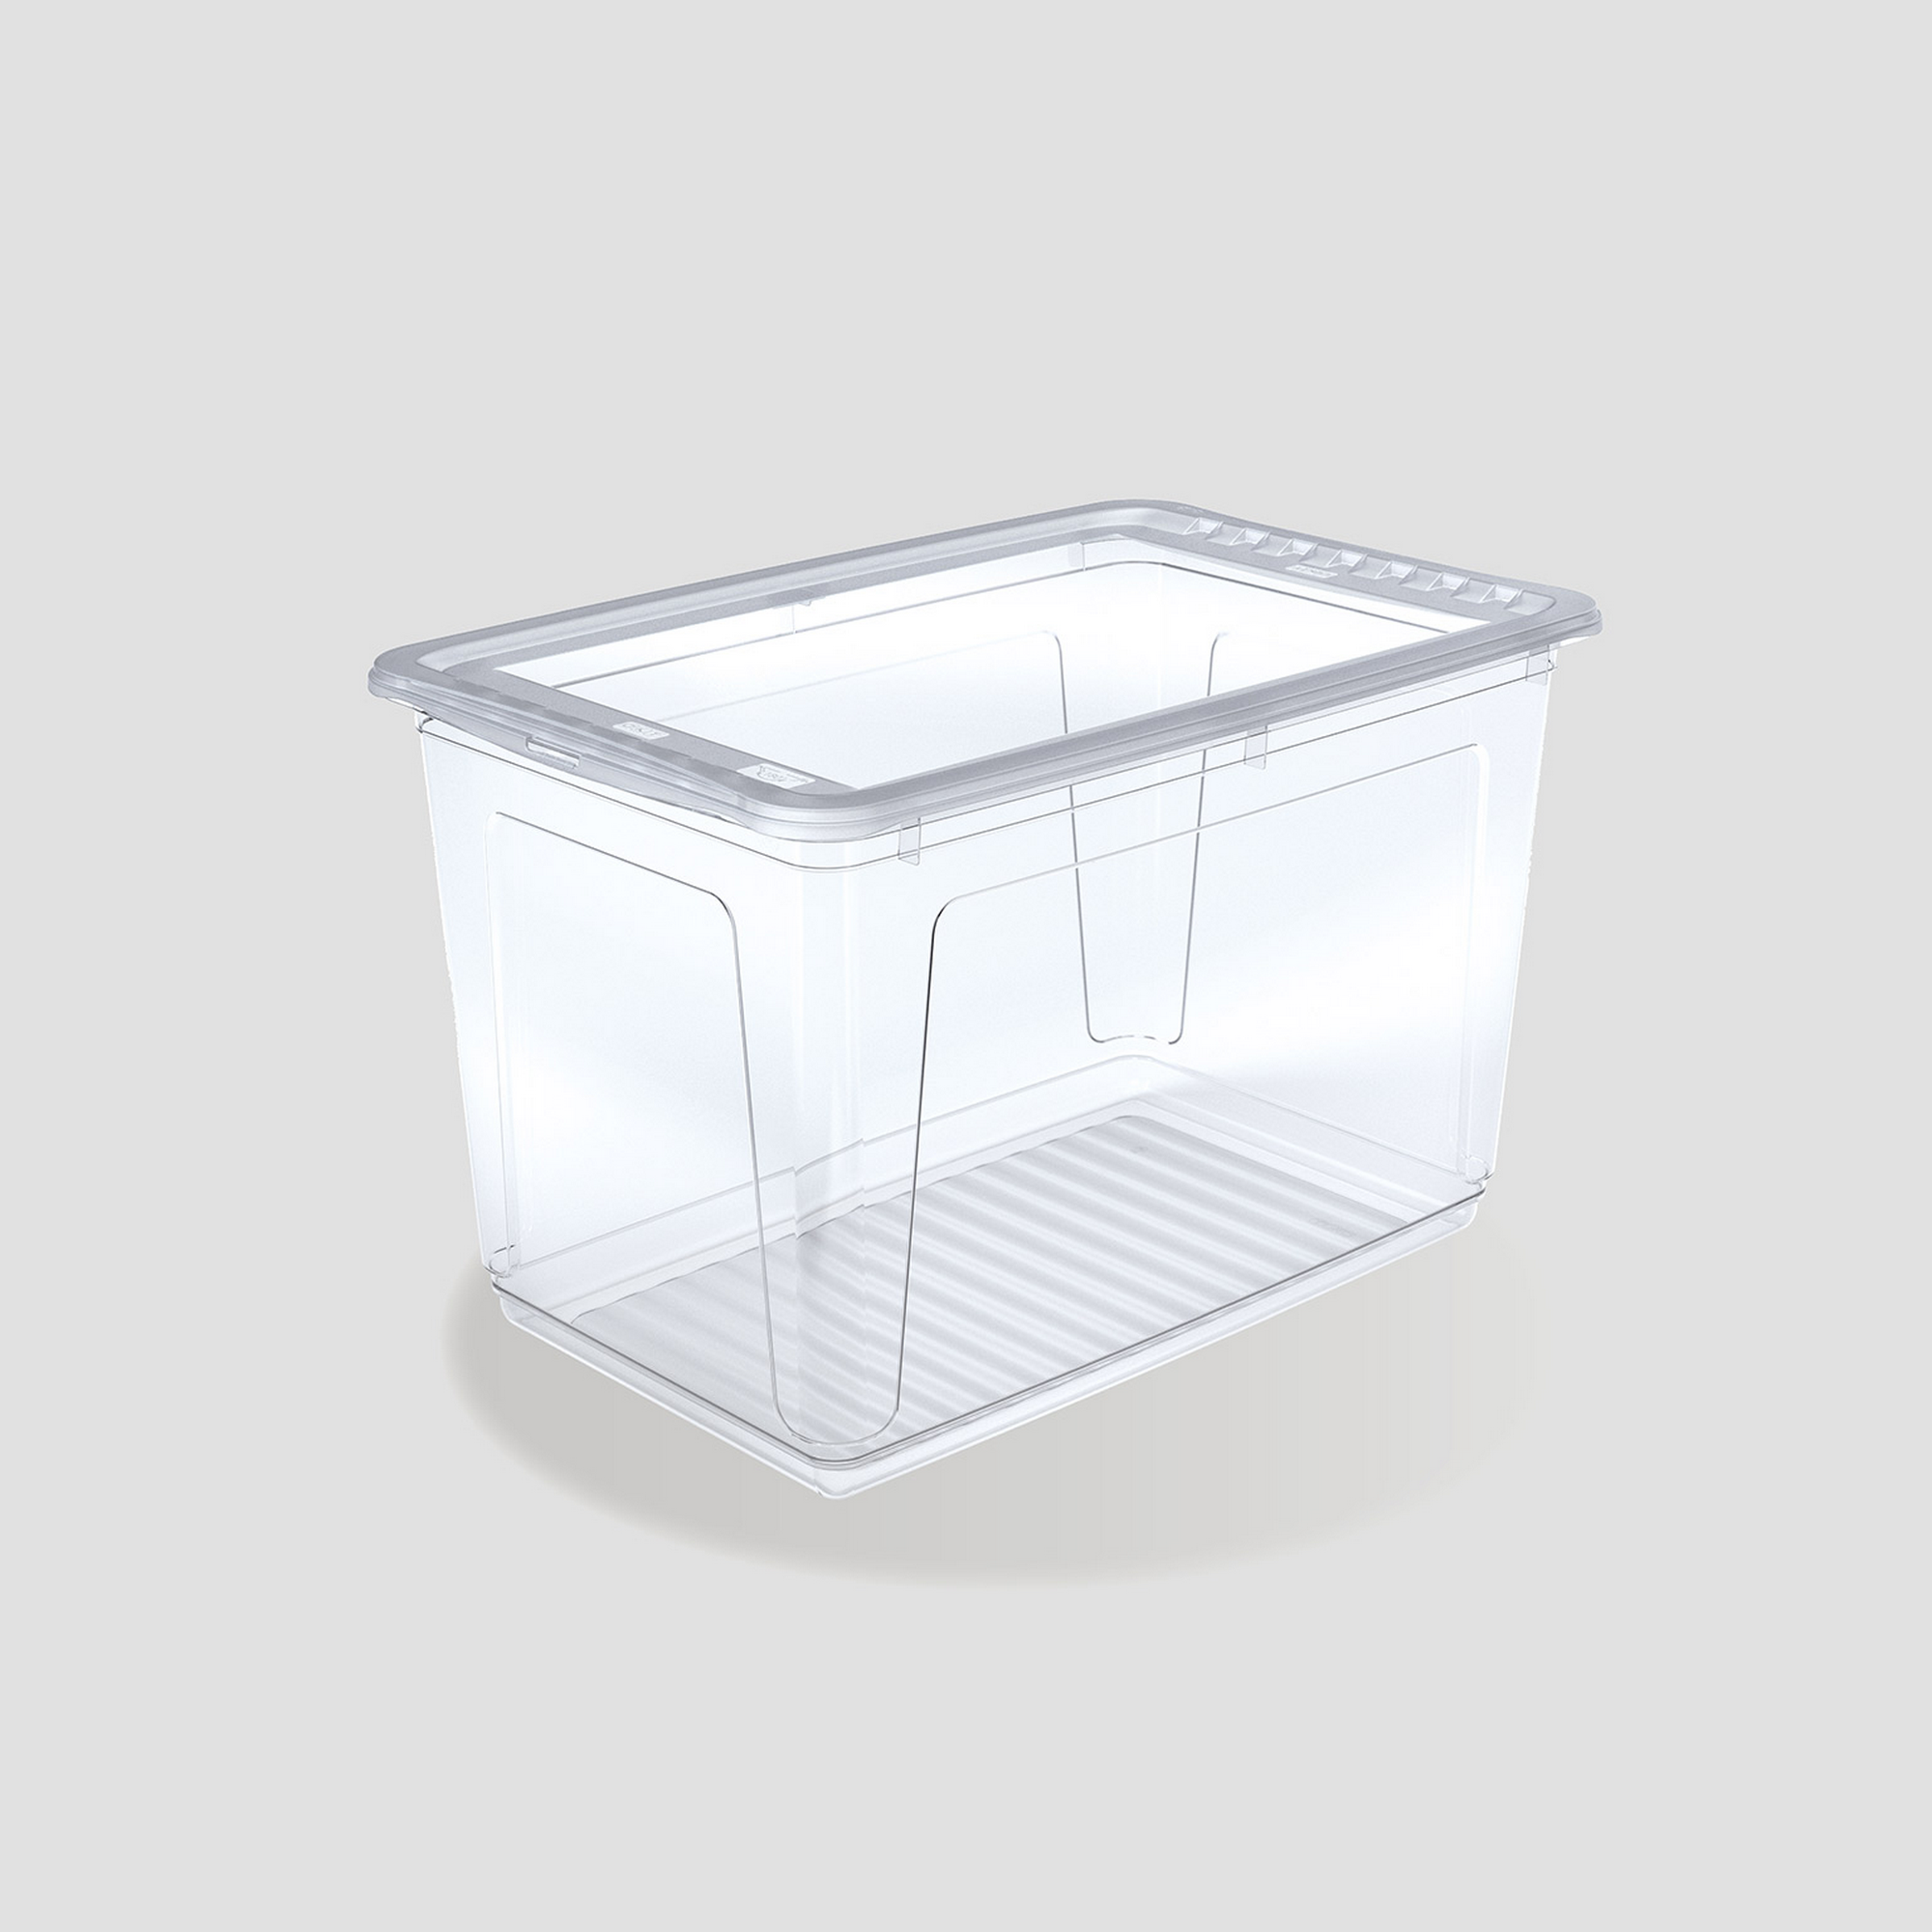 Aufbewahrungsbox 'Clearbox Bea' transparent 59 x 35 x 39 cm, inkl. Deckel + product picture